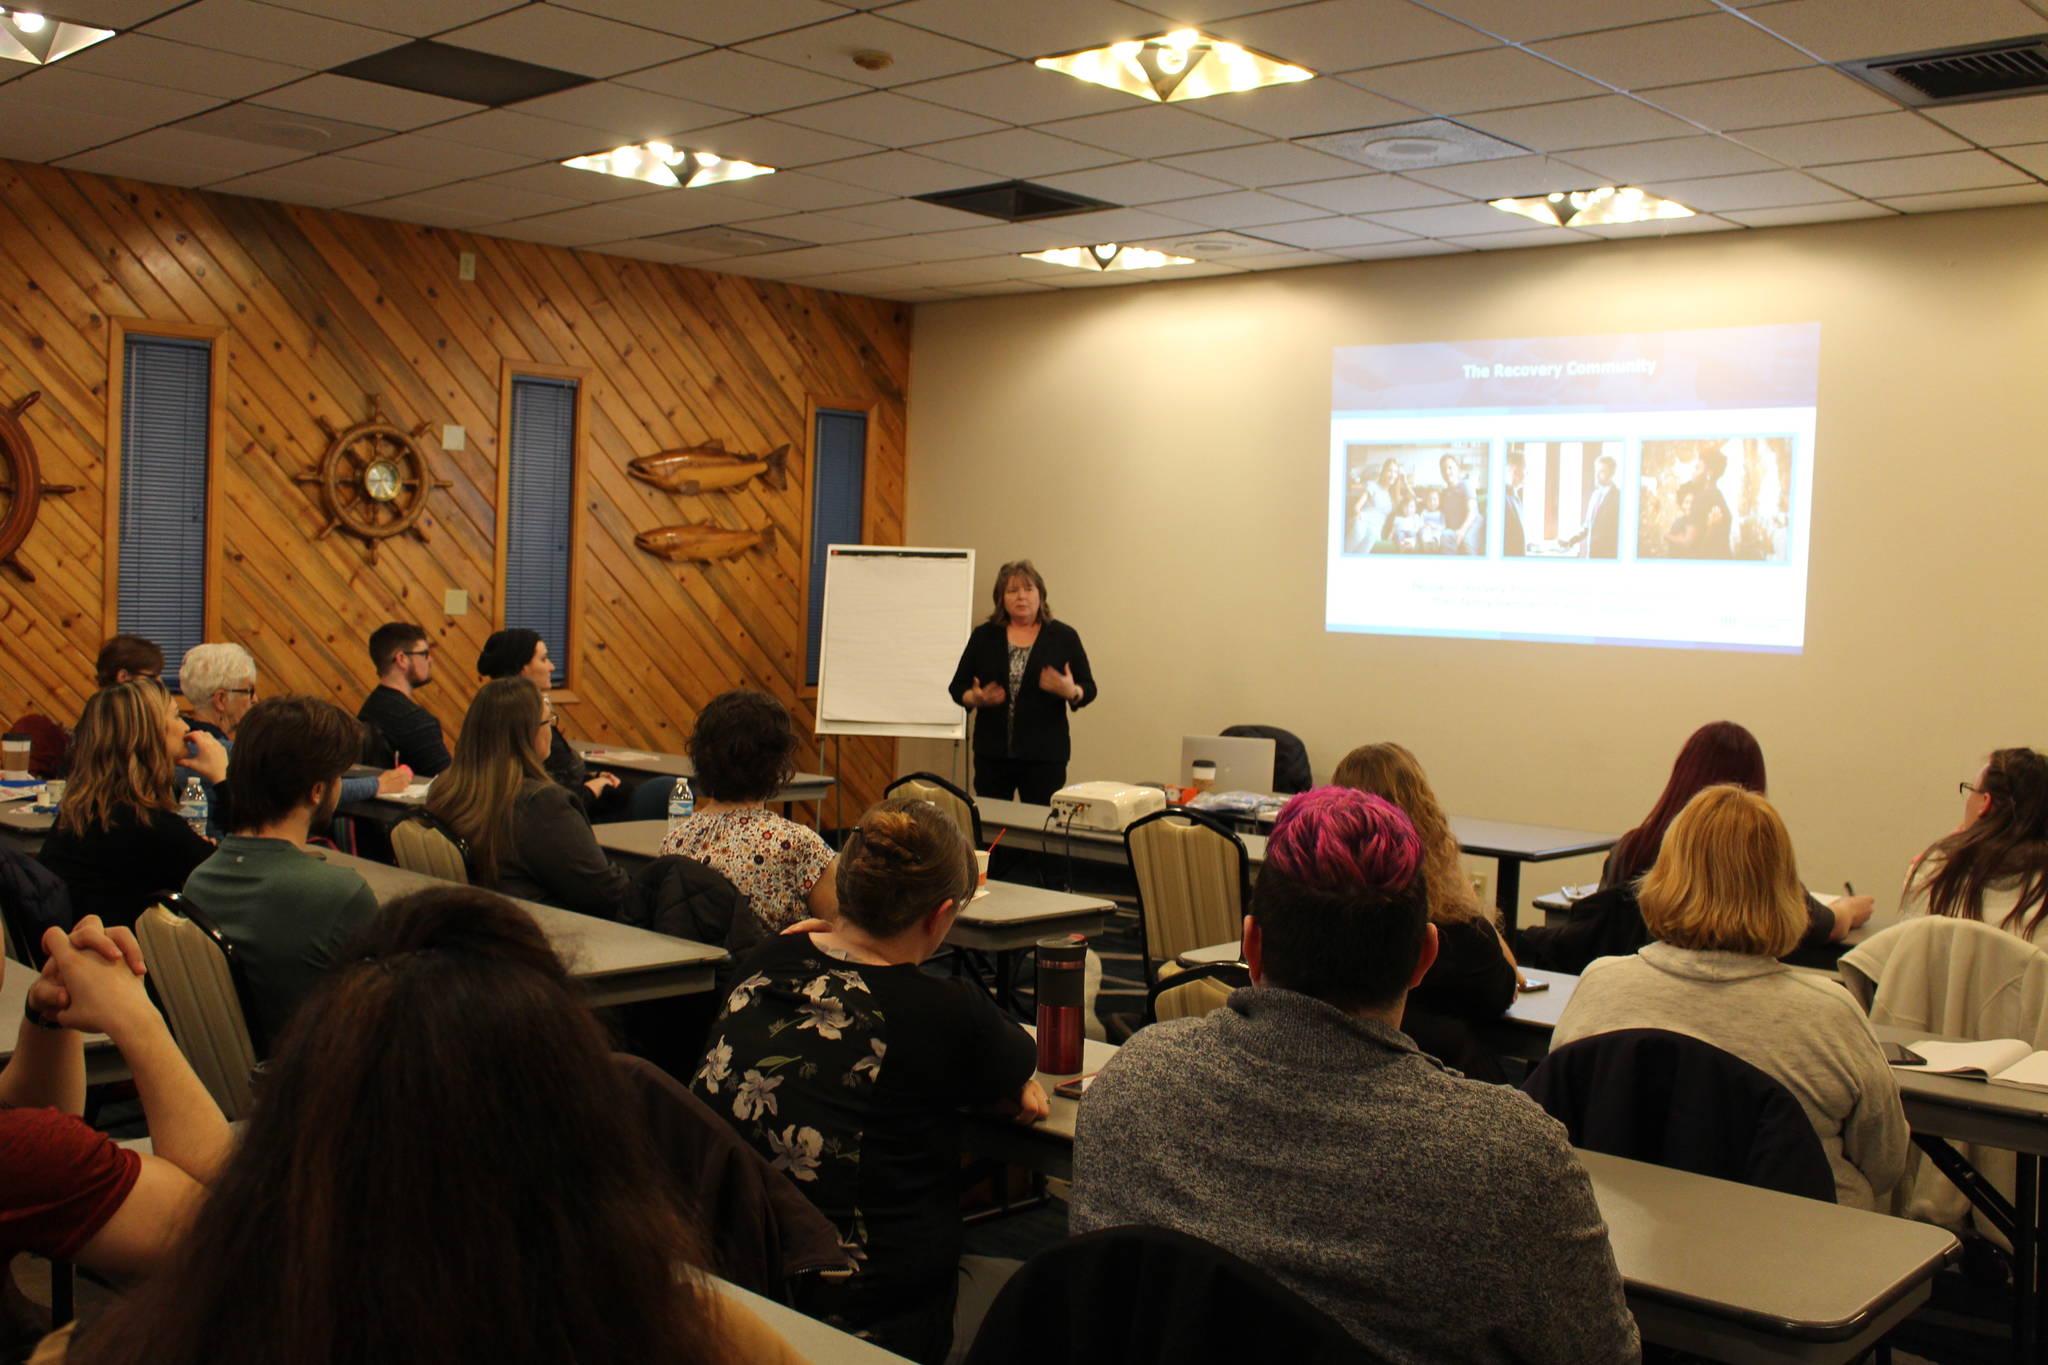 Patty McCarthy, CEO of Faces and Voices of Recovery, gives a presentation on recovery-ready communities at the Quality Inn in Kenai, Alaska on Feb. 18, 2020. (Photo by Brian Mazurek/Peninsula Clarion)                                Patty McCarthy, CEO of Faces and Voices of Recovery, gives a presentation on recovery-ready communities at the Quality Inn in Kenai on Feb. 18. (Photo by Brian Mazurek/Peninsula Clarion)